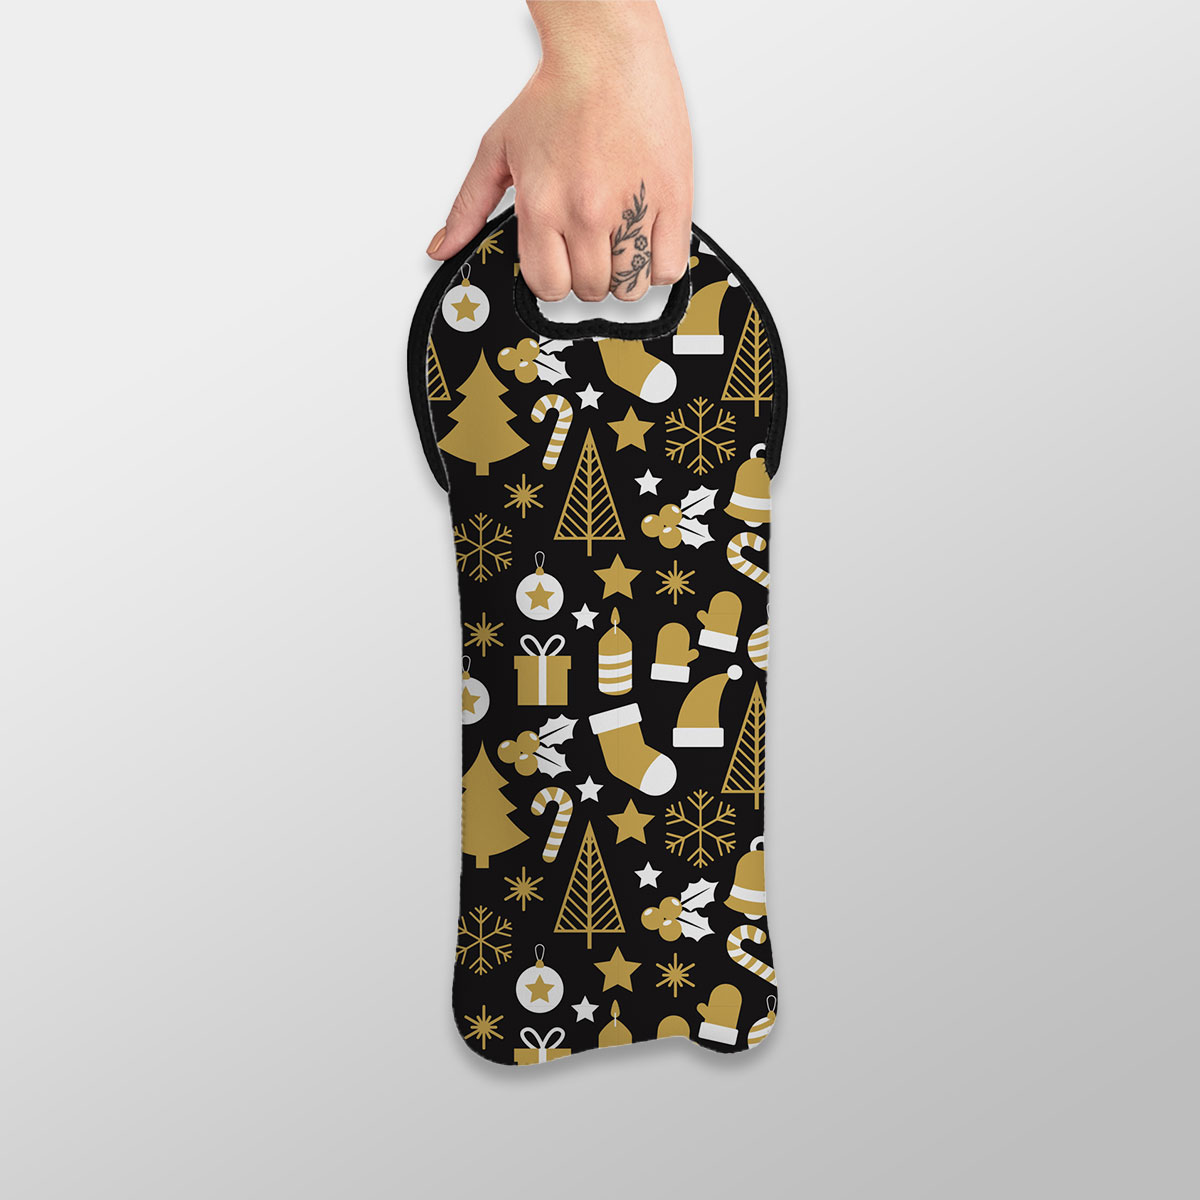 White And Gold Christmas Socks, Christmas Tree, Candy Cane On Black Background Wine Tote Bag